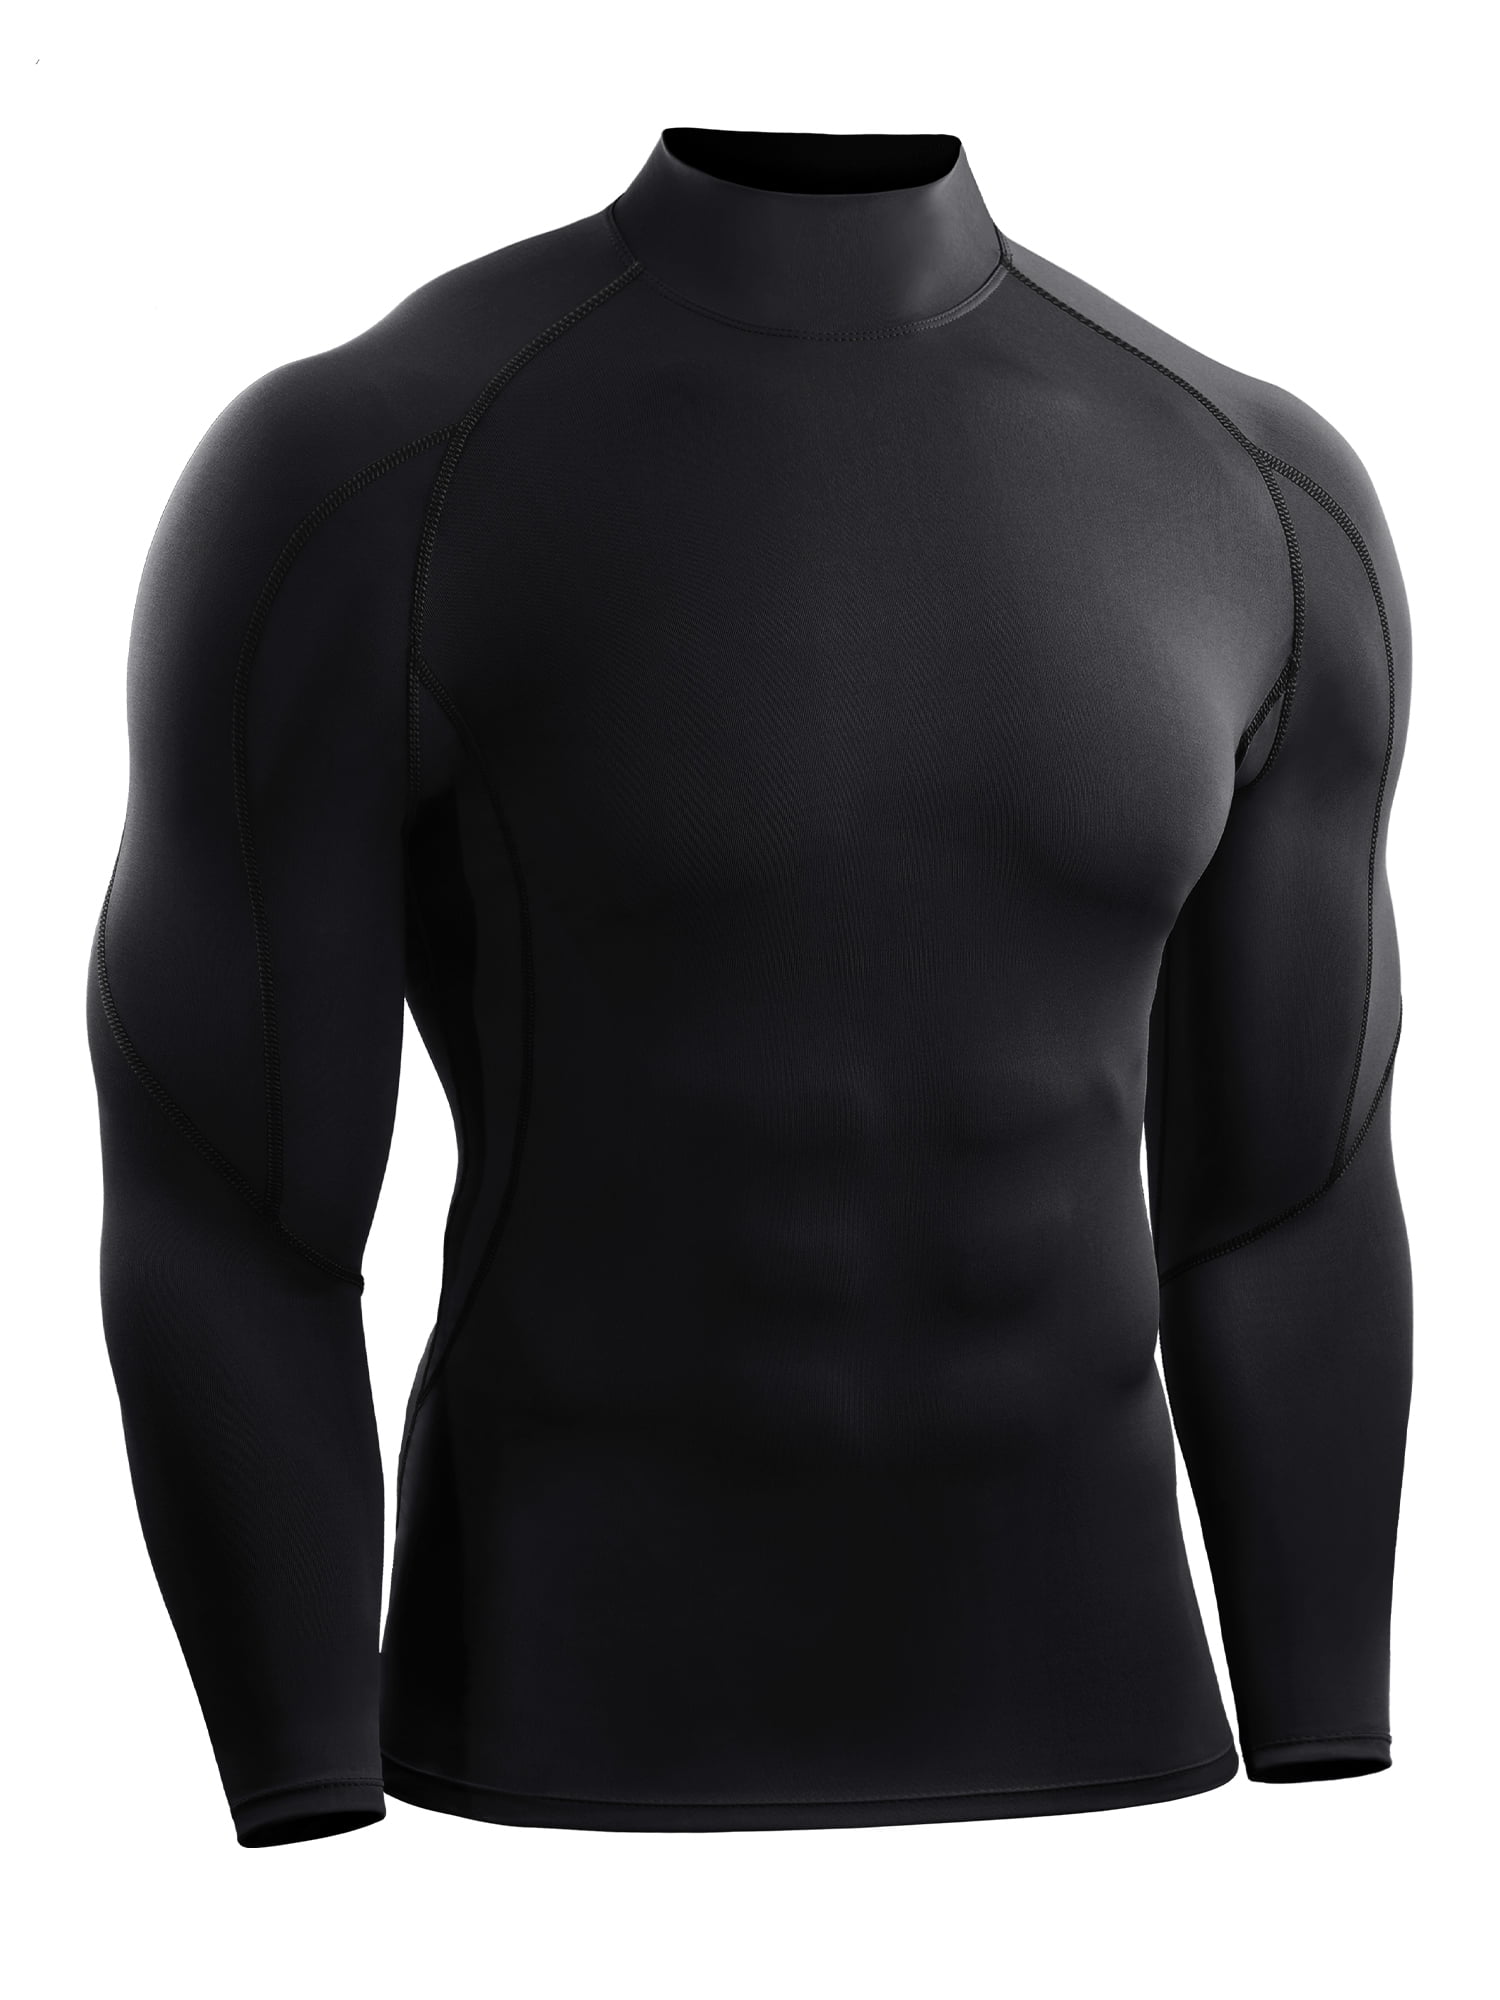 Mens Thermal base layer Compression Top Long sleeve body Armour Cold Wear shirt 